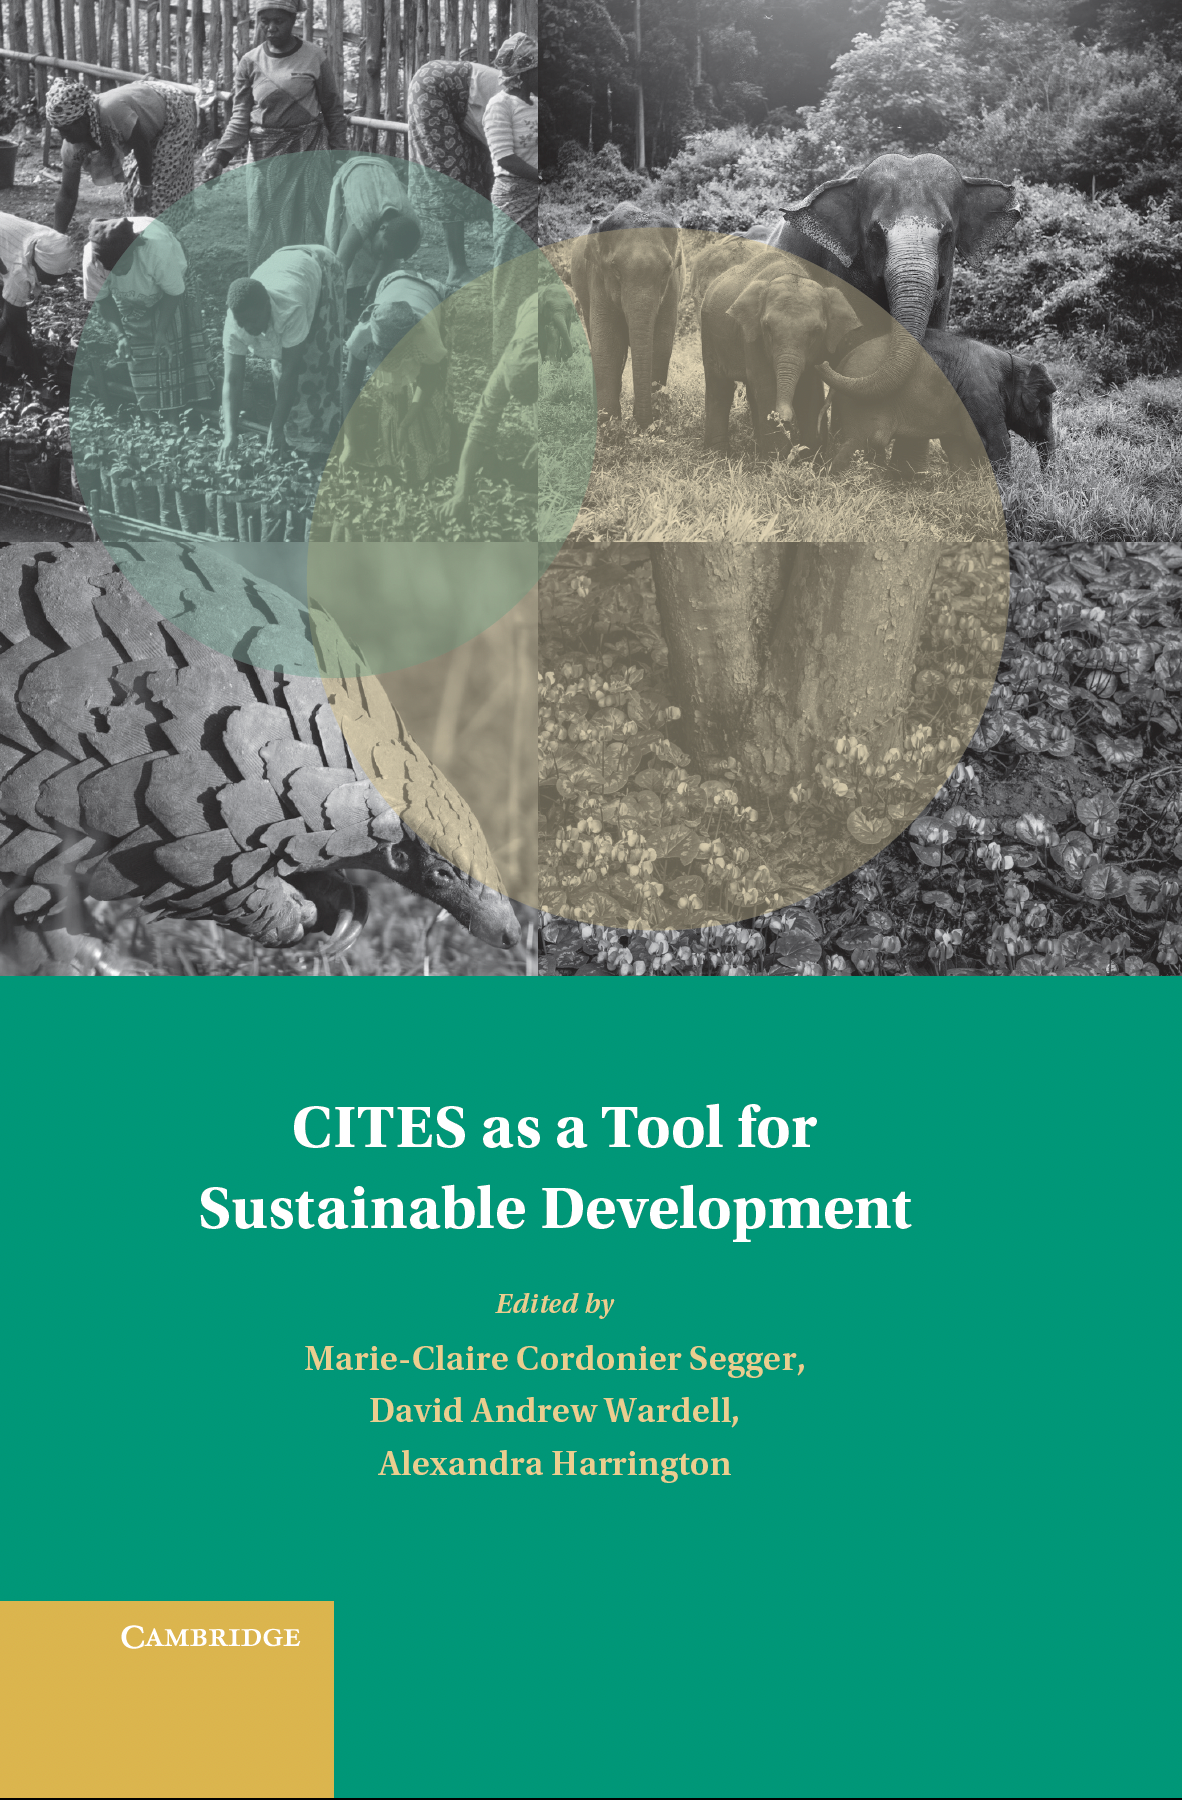 Book Cover for CITES as a Tool for Sustainable Development.